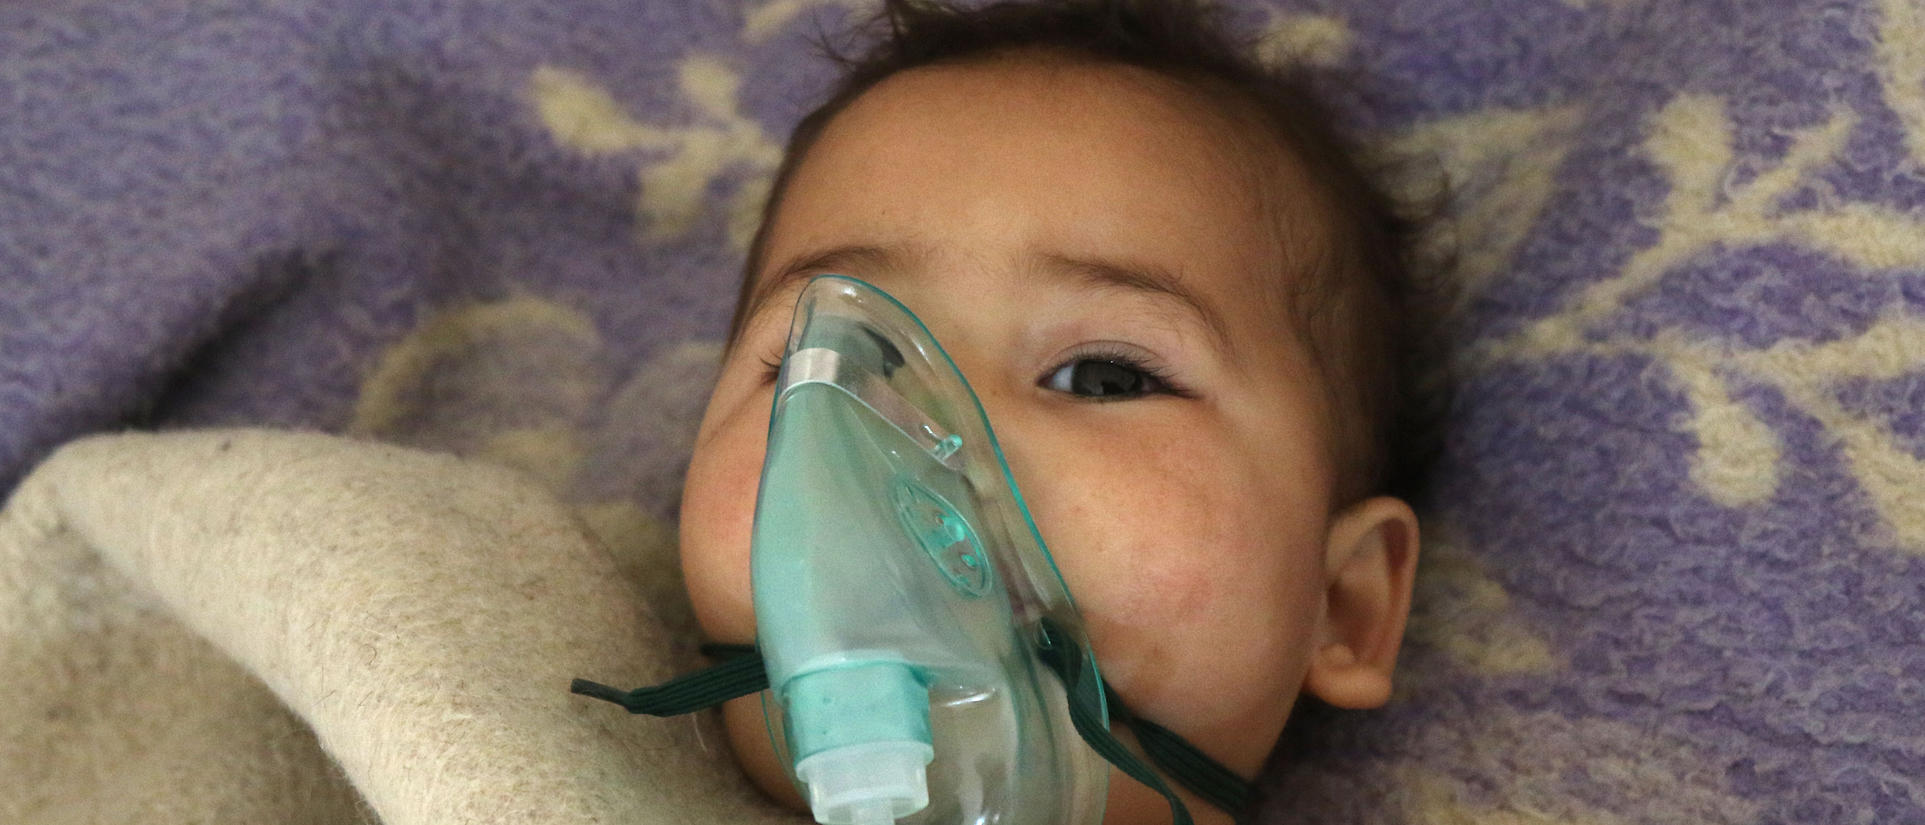 A baby injured in a chemical weapons attack in Idlib, Syria wears an oxygen mask while undergoing treatment